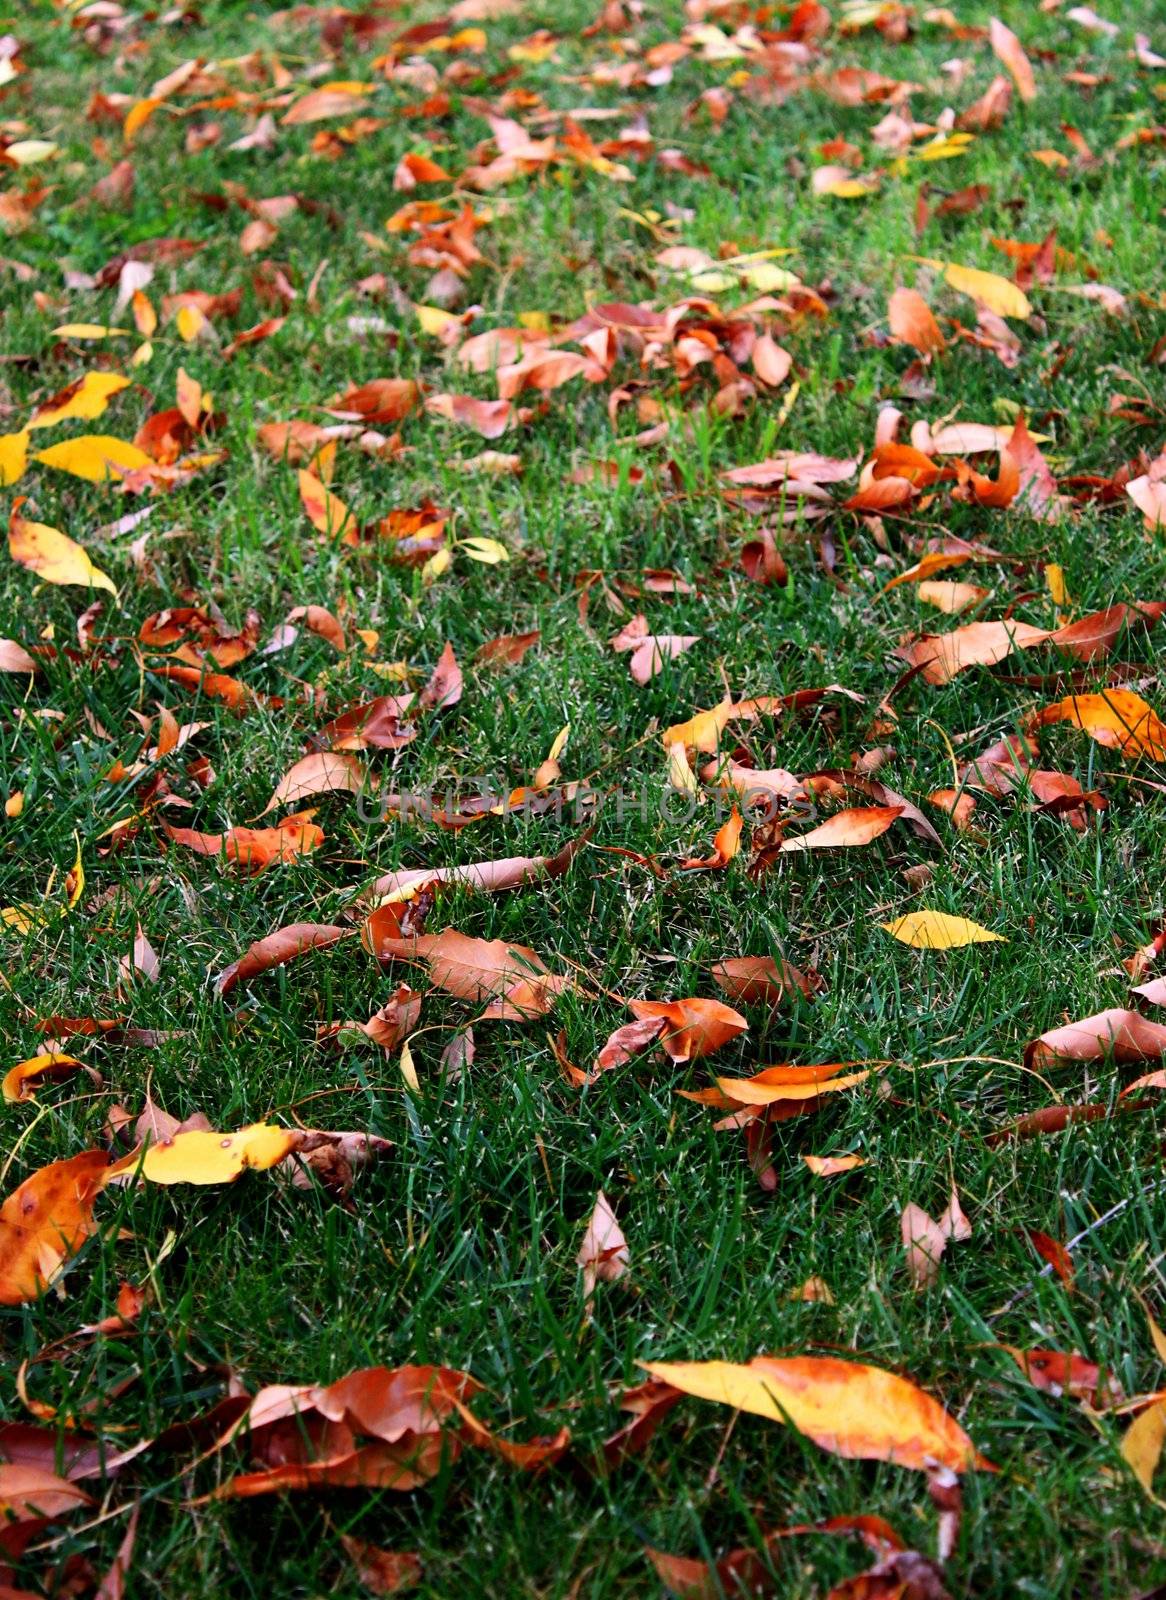 Green grass with a blanked of orange autumn leafs